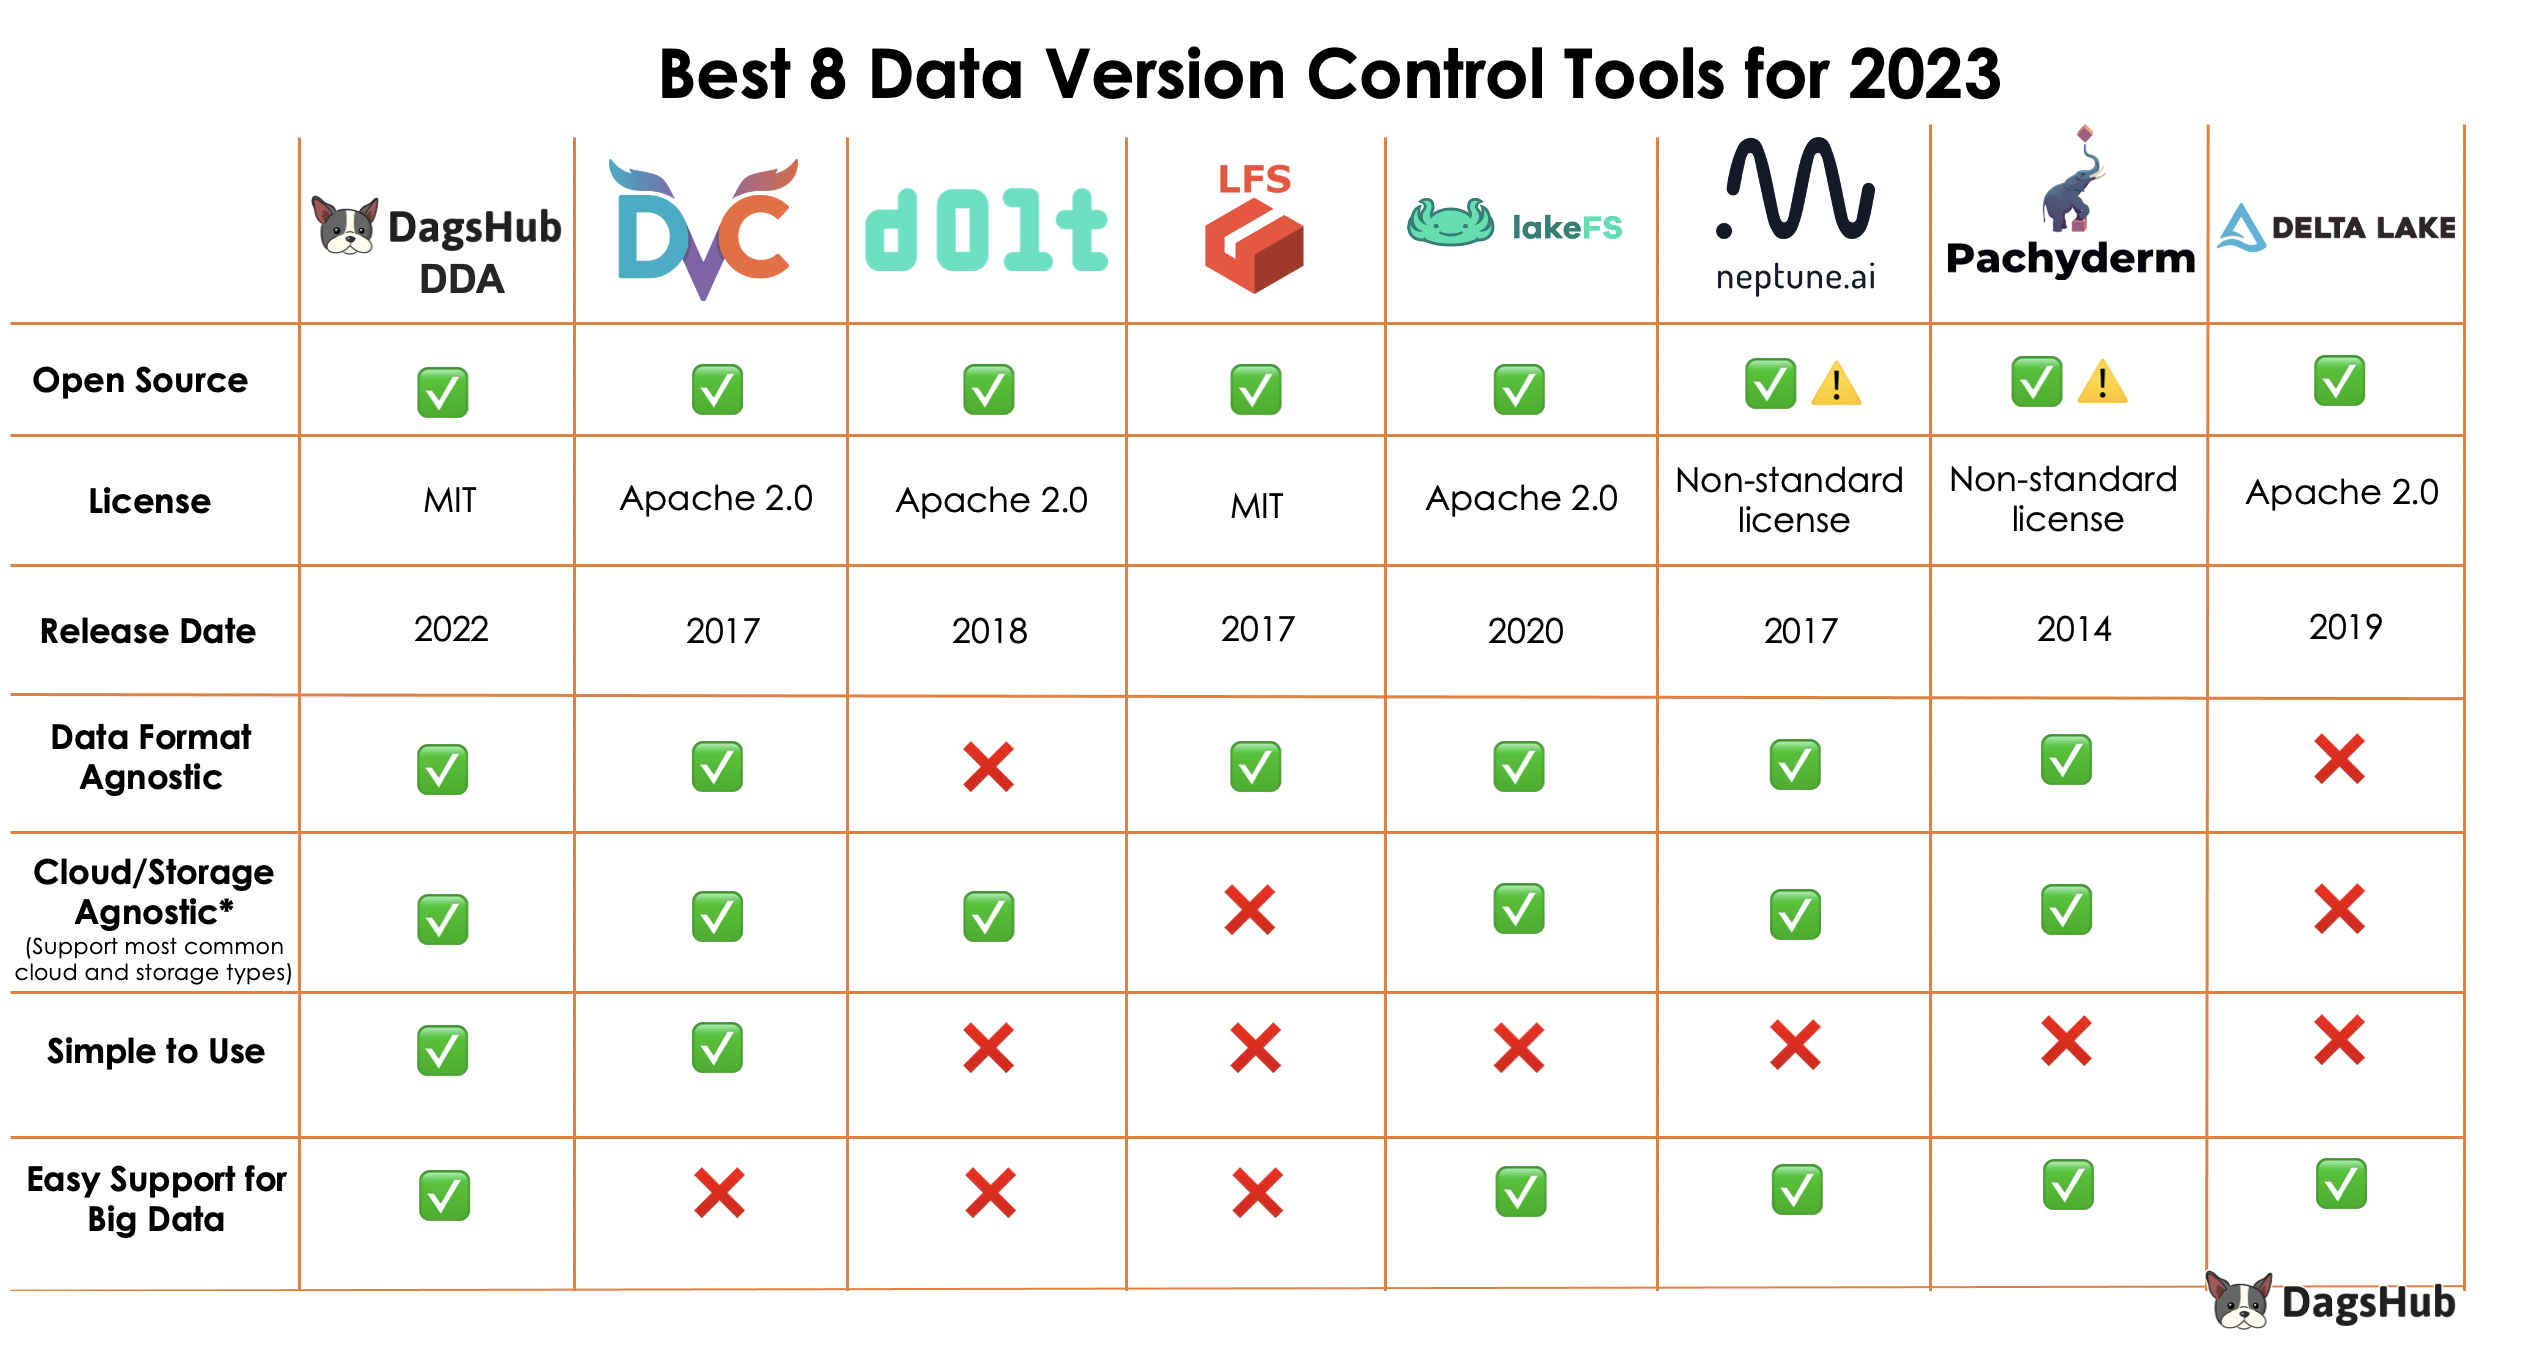 Best 8 Data Version Control Tools for Machine Learning for 2023